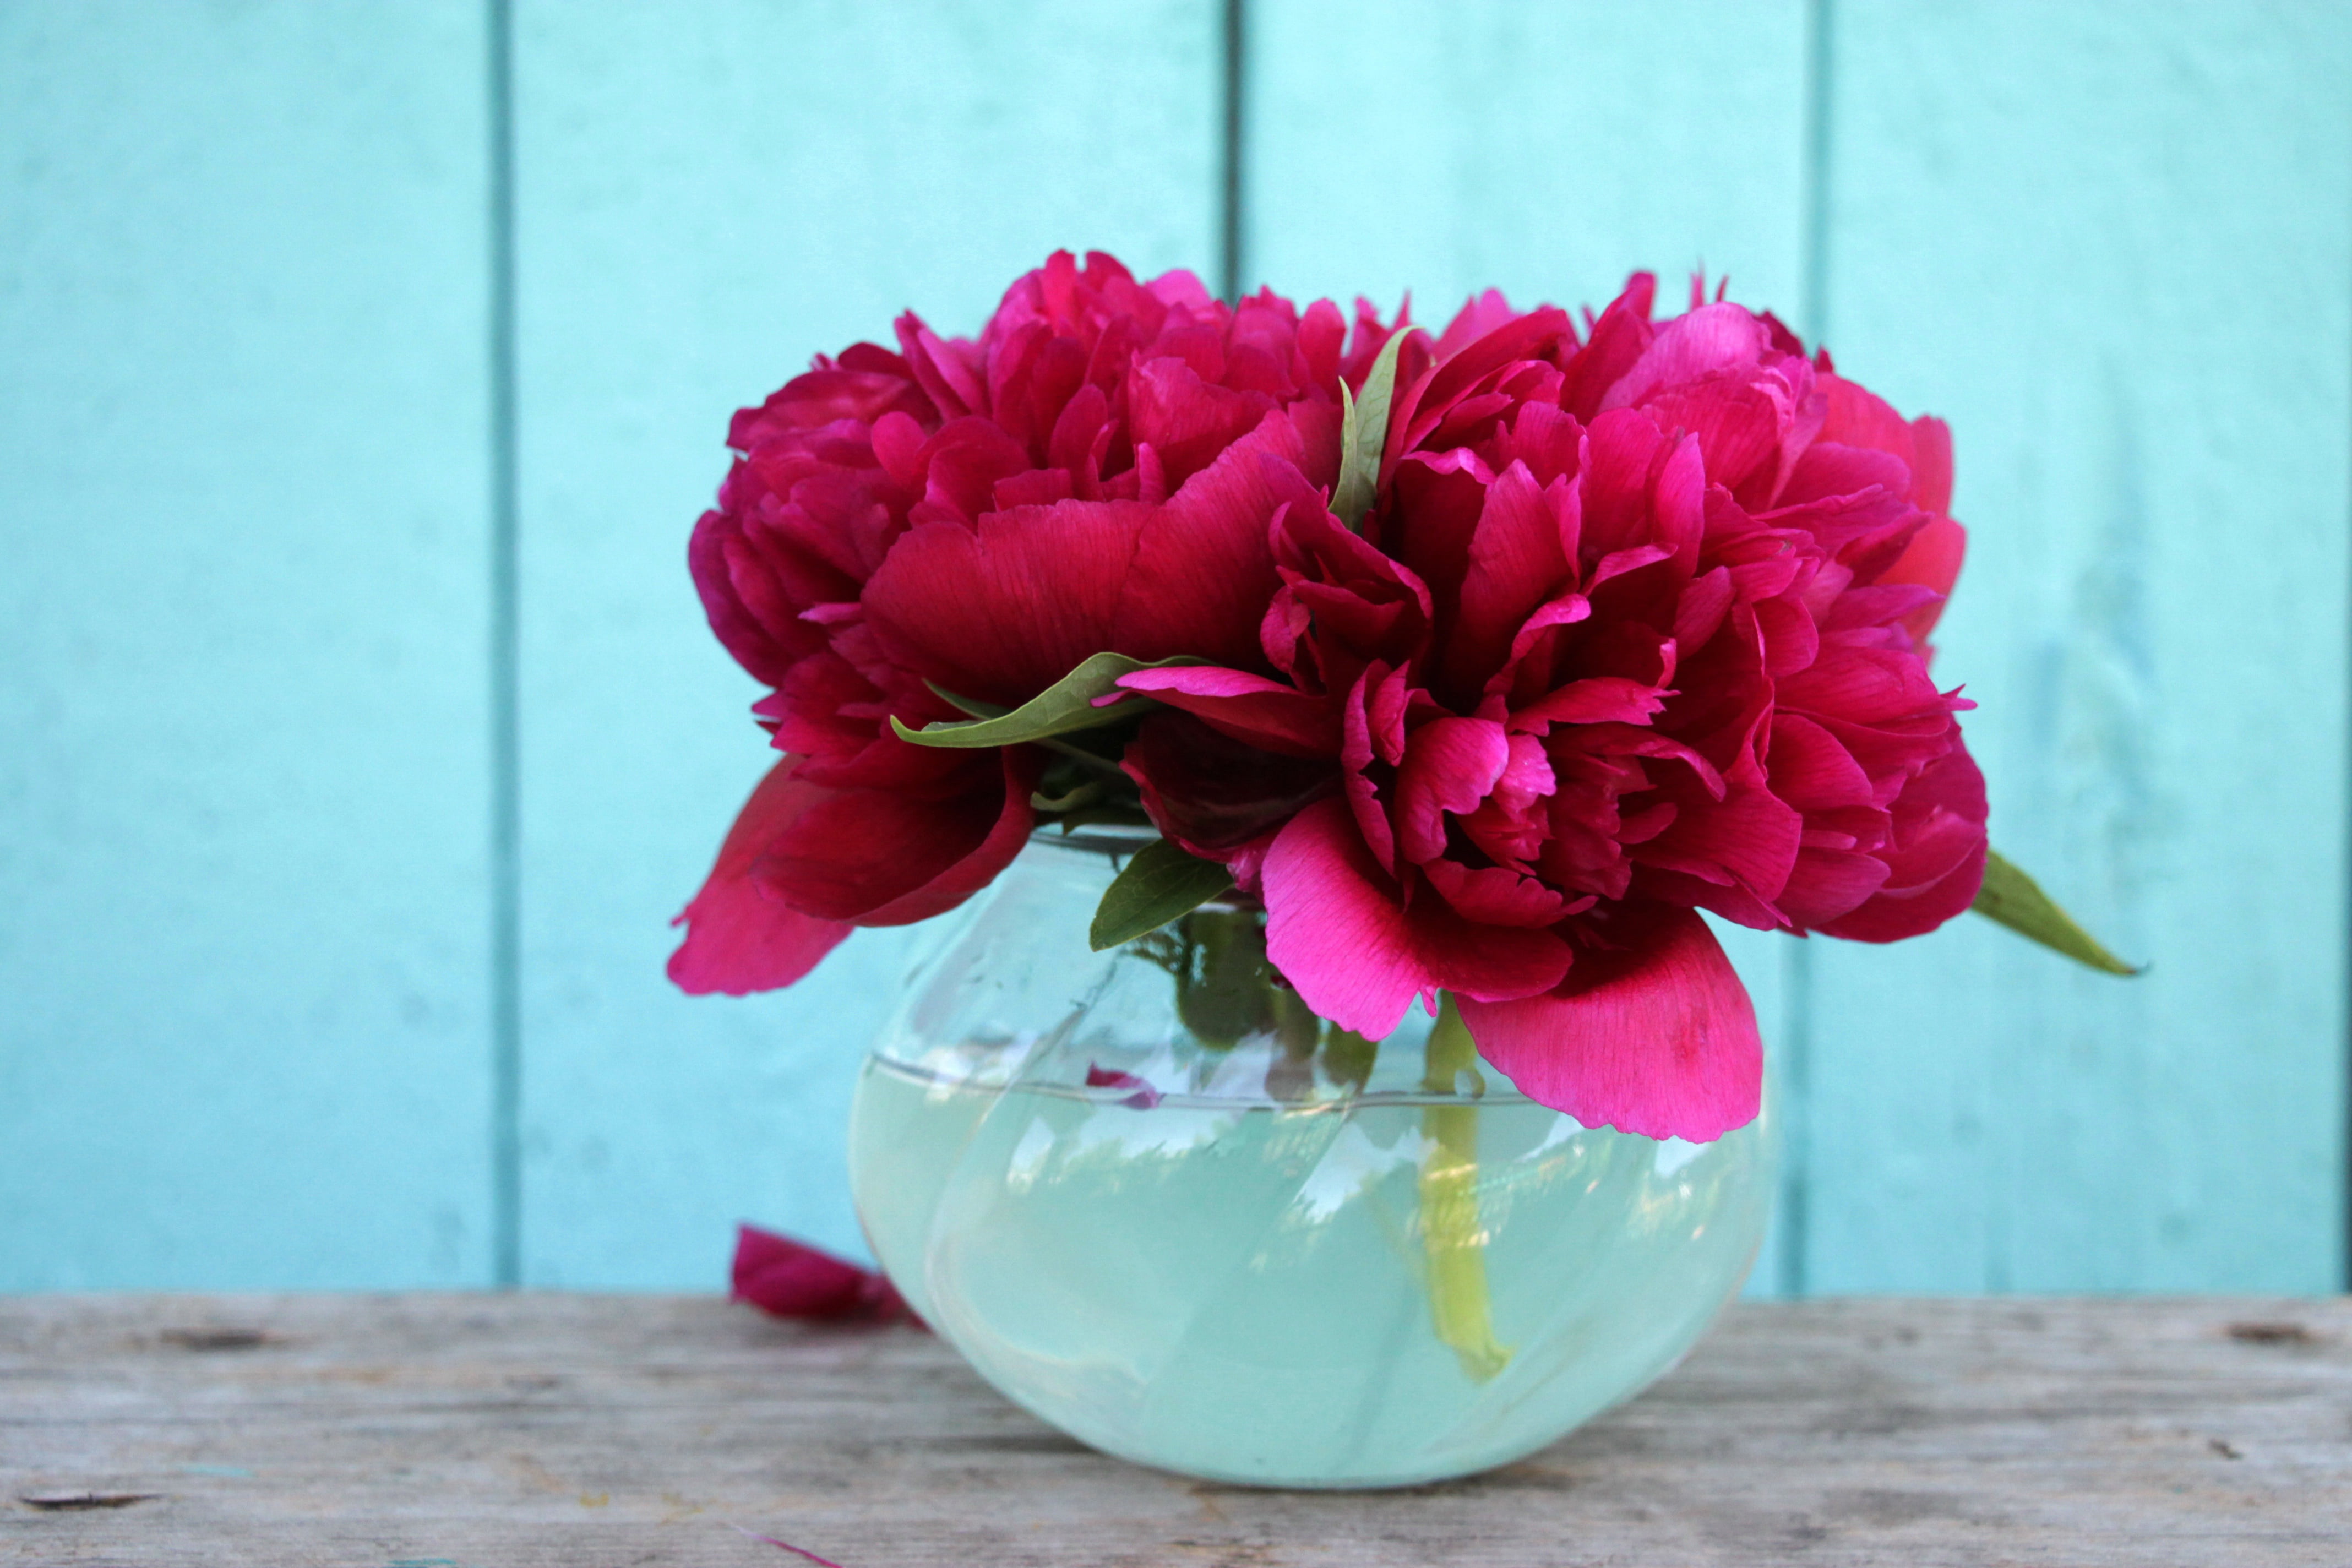 flowers, background, bouquet, peonies, peony, flowers in a vase